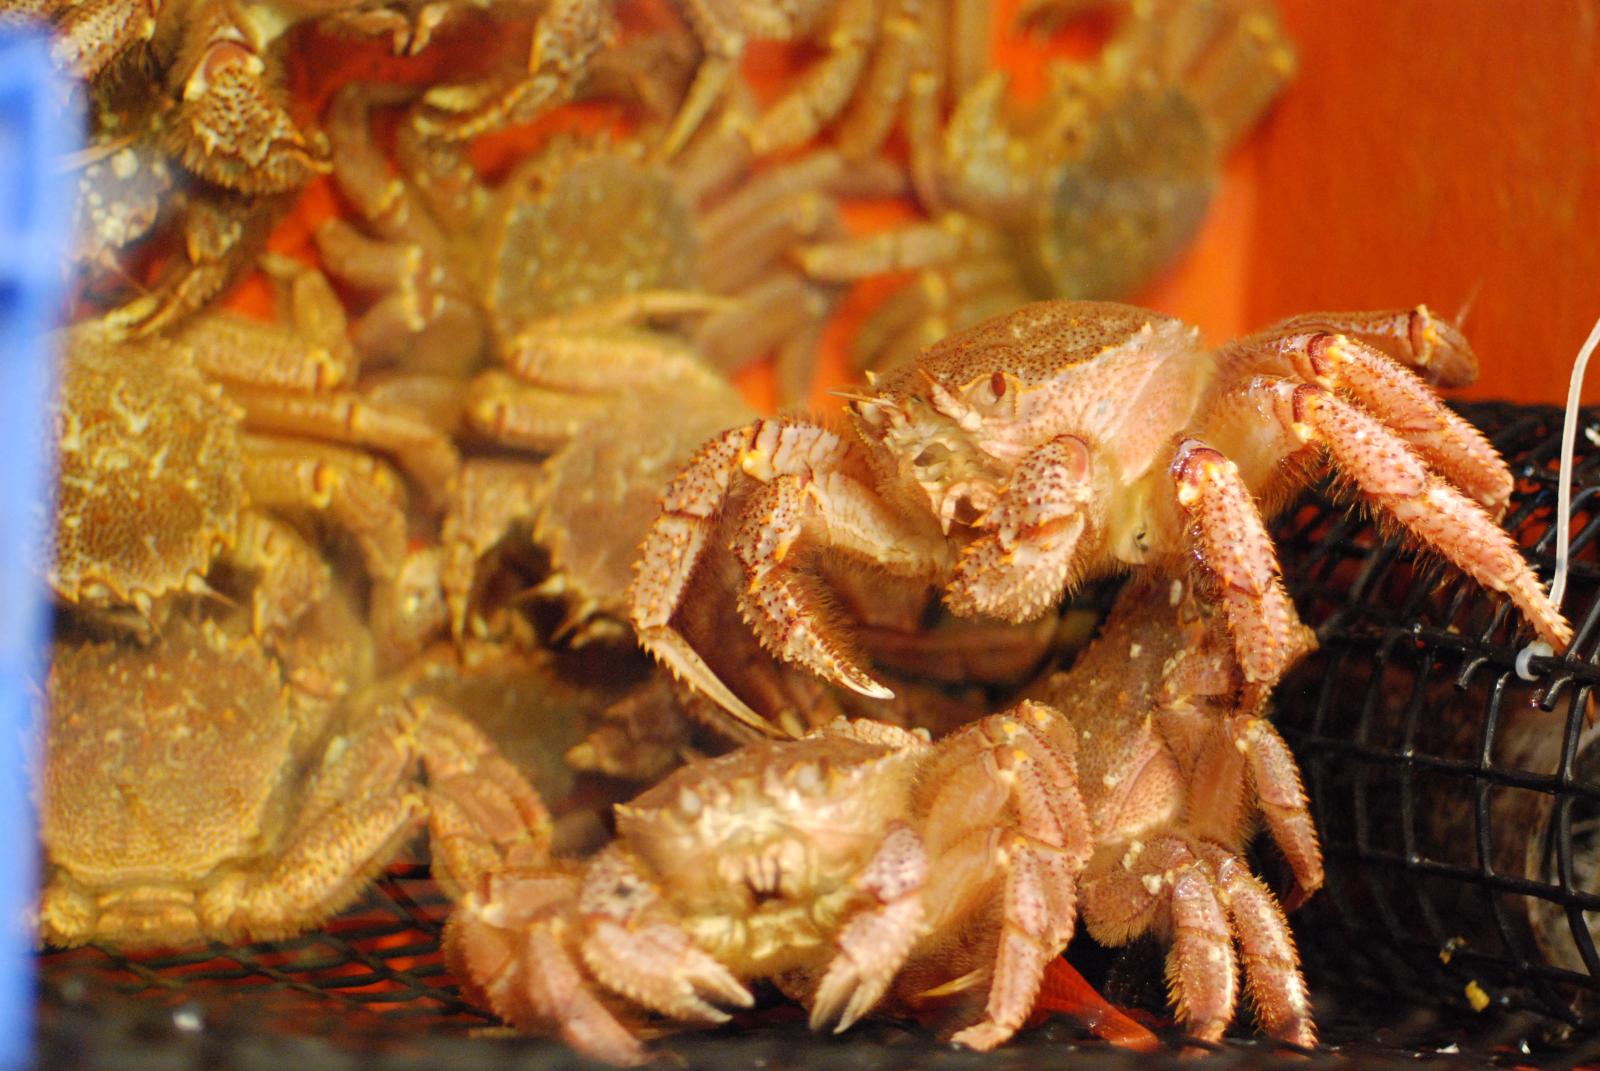 several crabs are displayed on a mesh rack